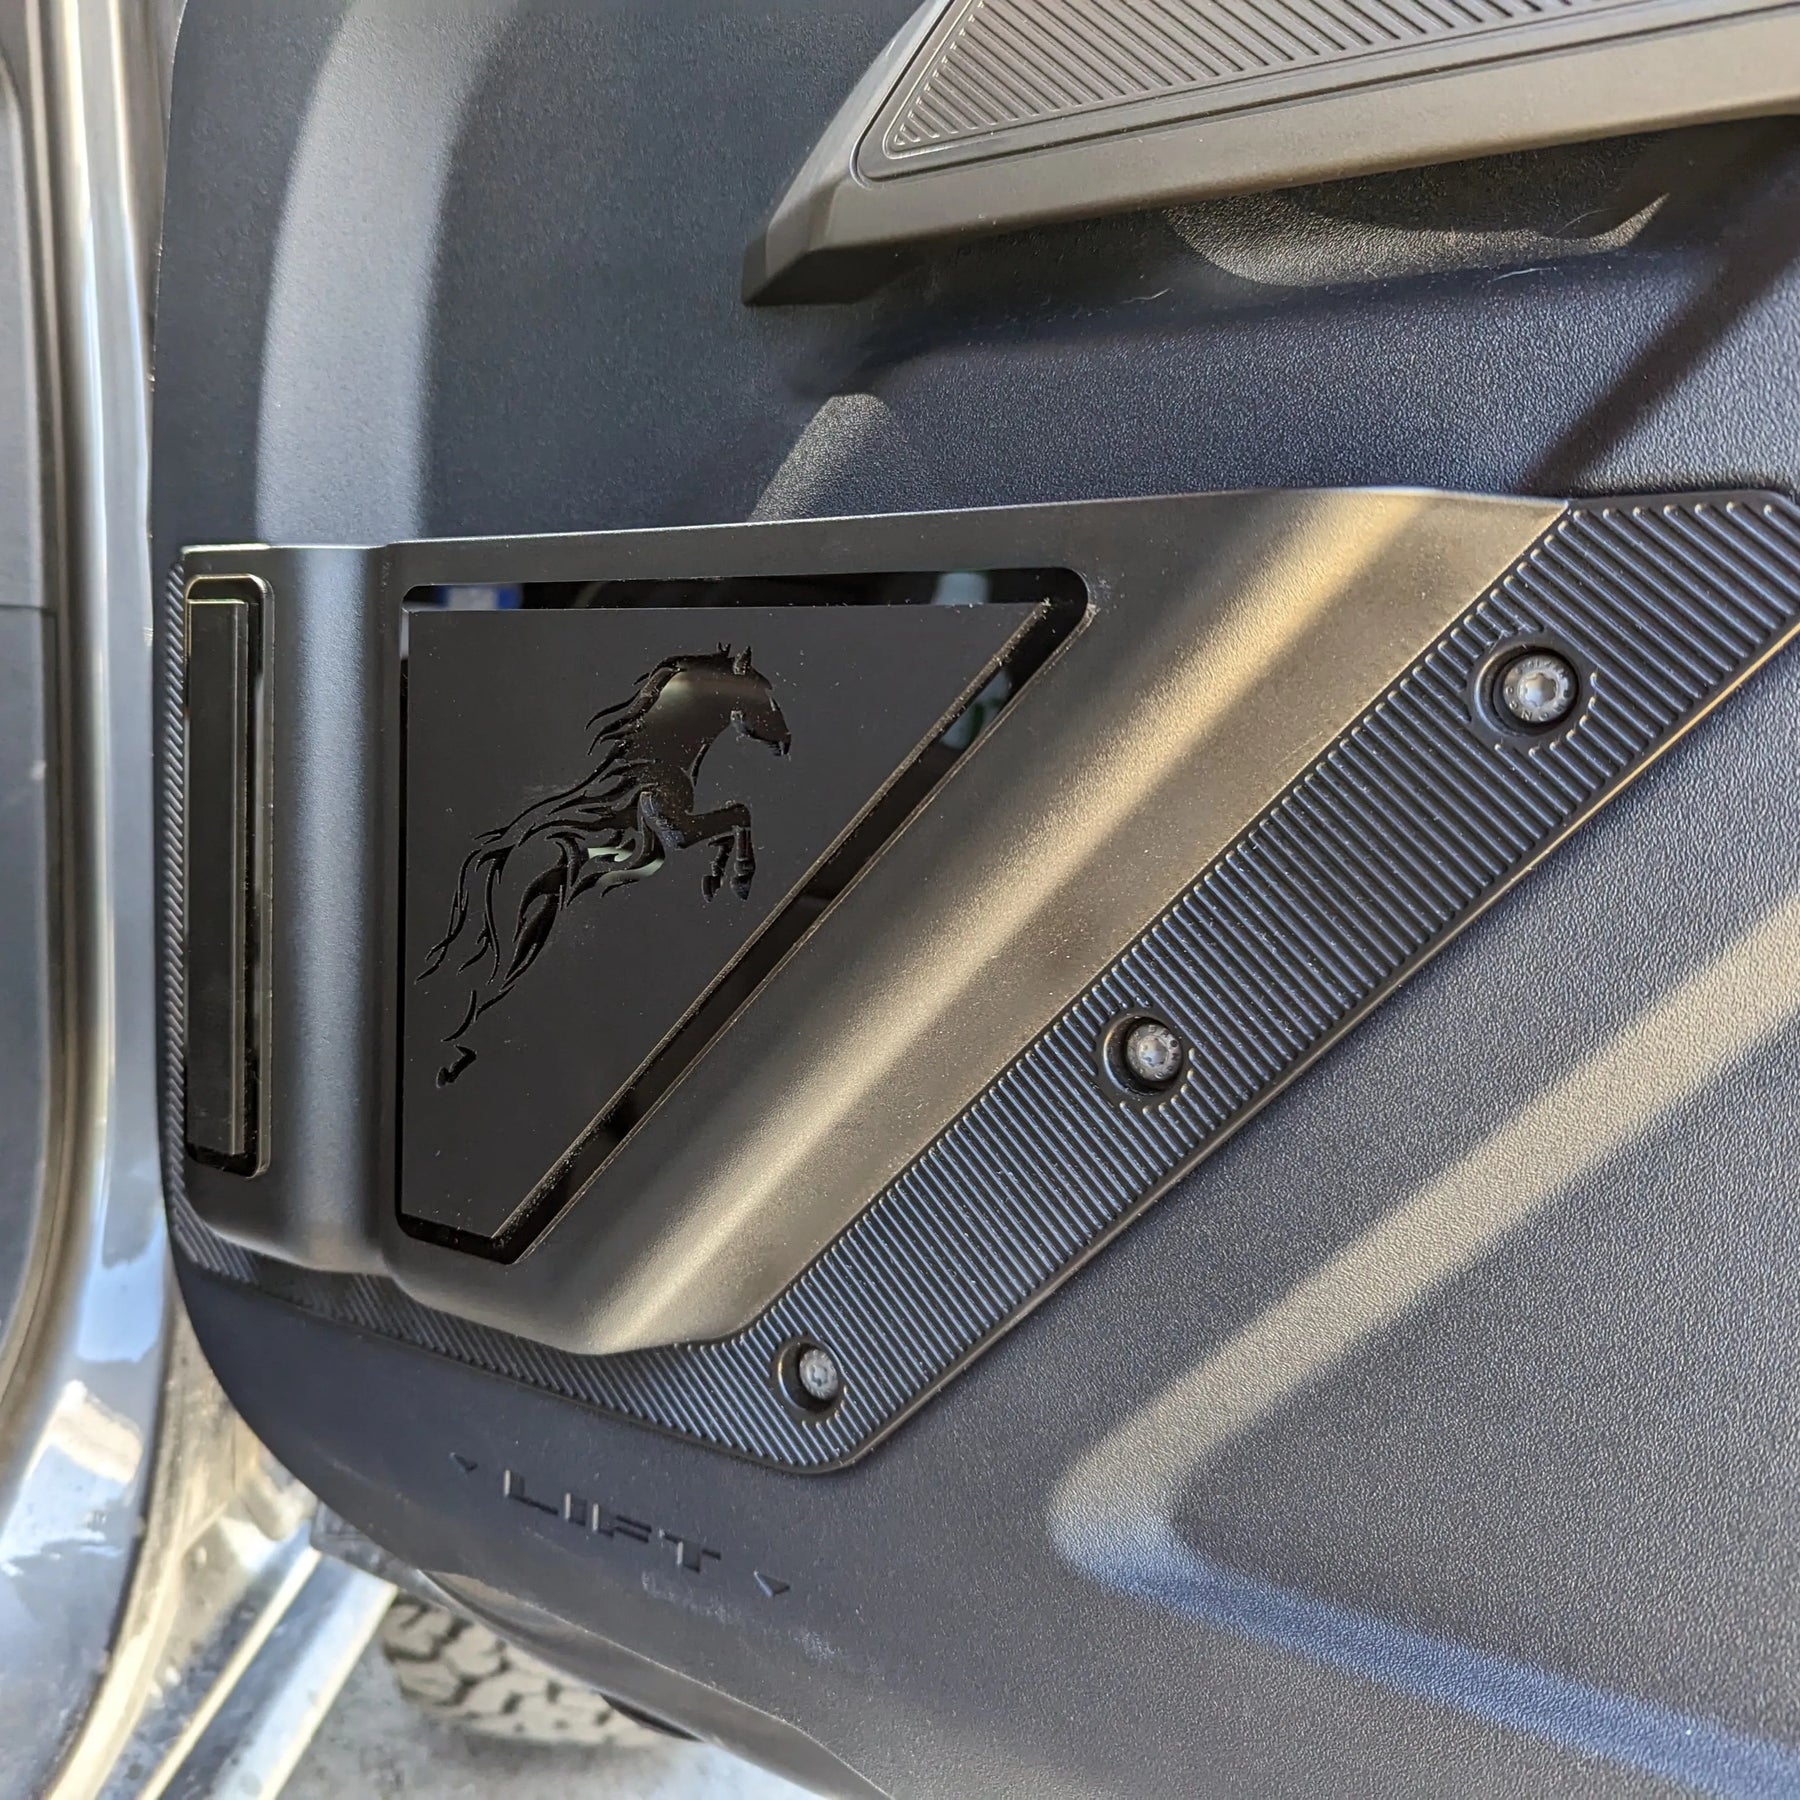 Door Storage Pocket Pair - Style 1 - Tribal Horse Design - Fits 2021+ Bronco® - Multiple Colors Available